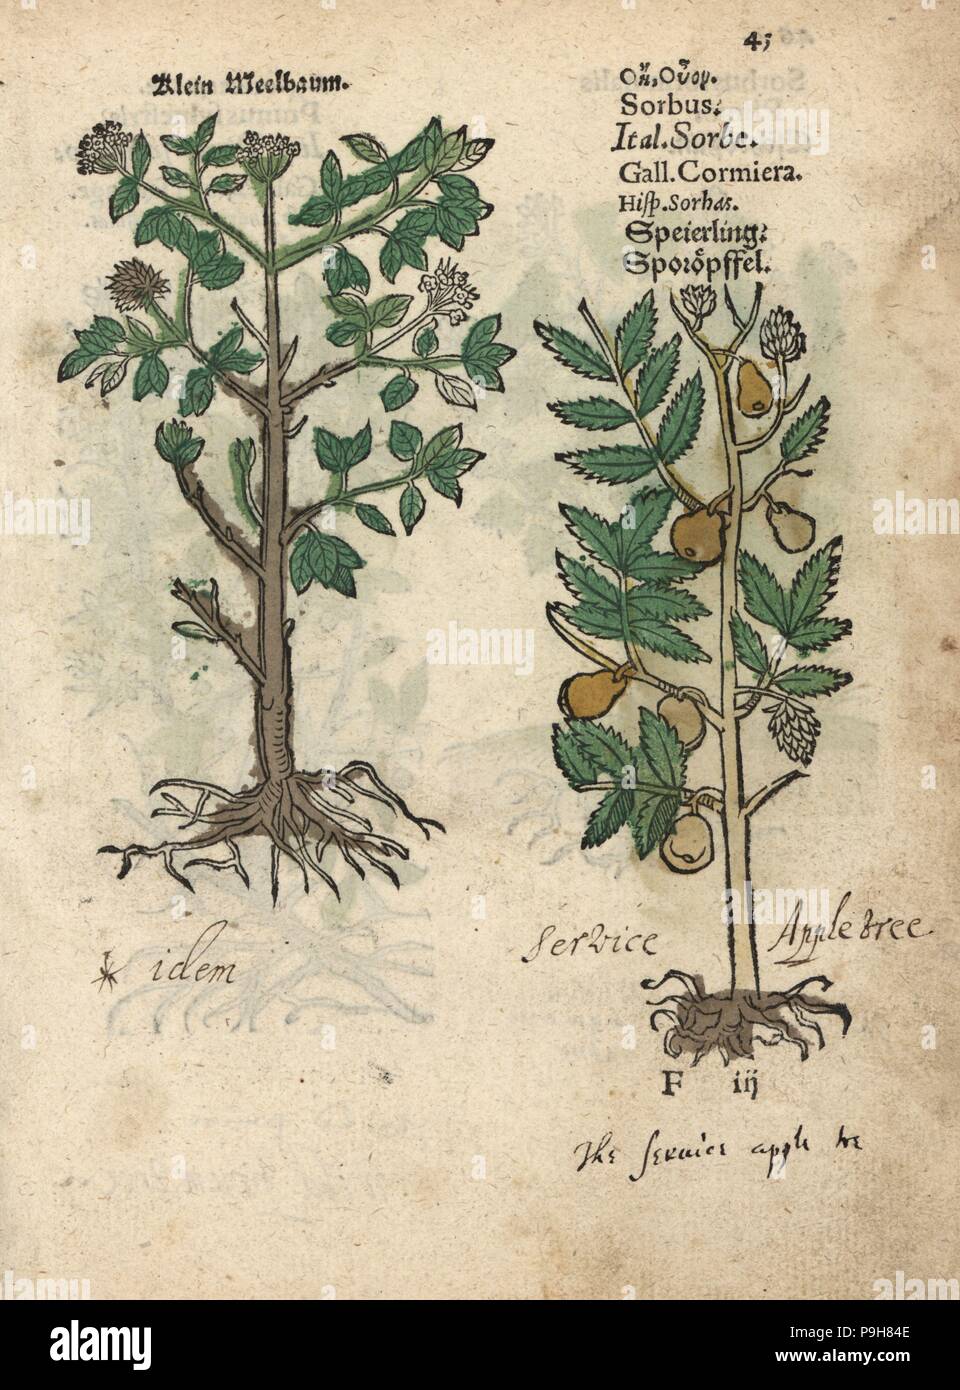 Ash tree, Fraxinus species and service tree, Sorbus domestica. Handcoloured woodblock engraving of a botanical illustration from Adam Lonicer's Krauterbuch, or Herbal, Frankfurt, 1557. This from a 17th century pirate edition or atlas of illustrations only, with captions in Latin, Greek, French, Italian, German, and in English manuscript. Stock Photo